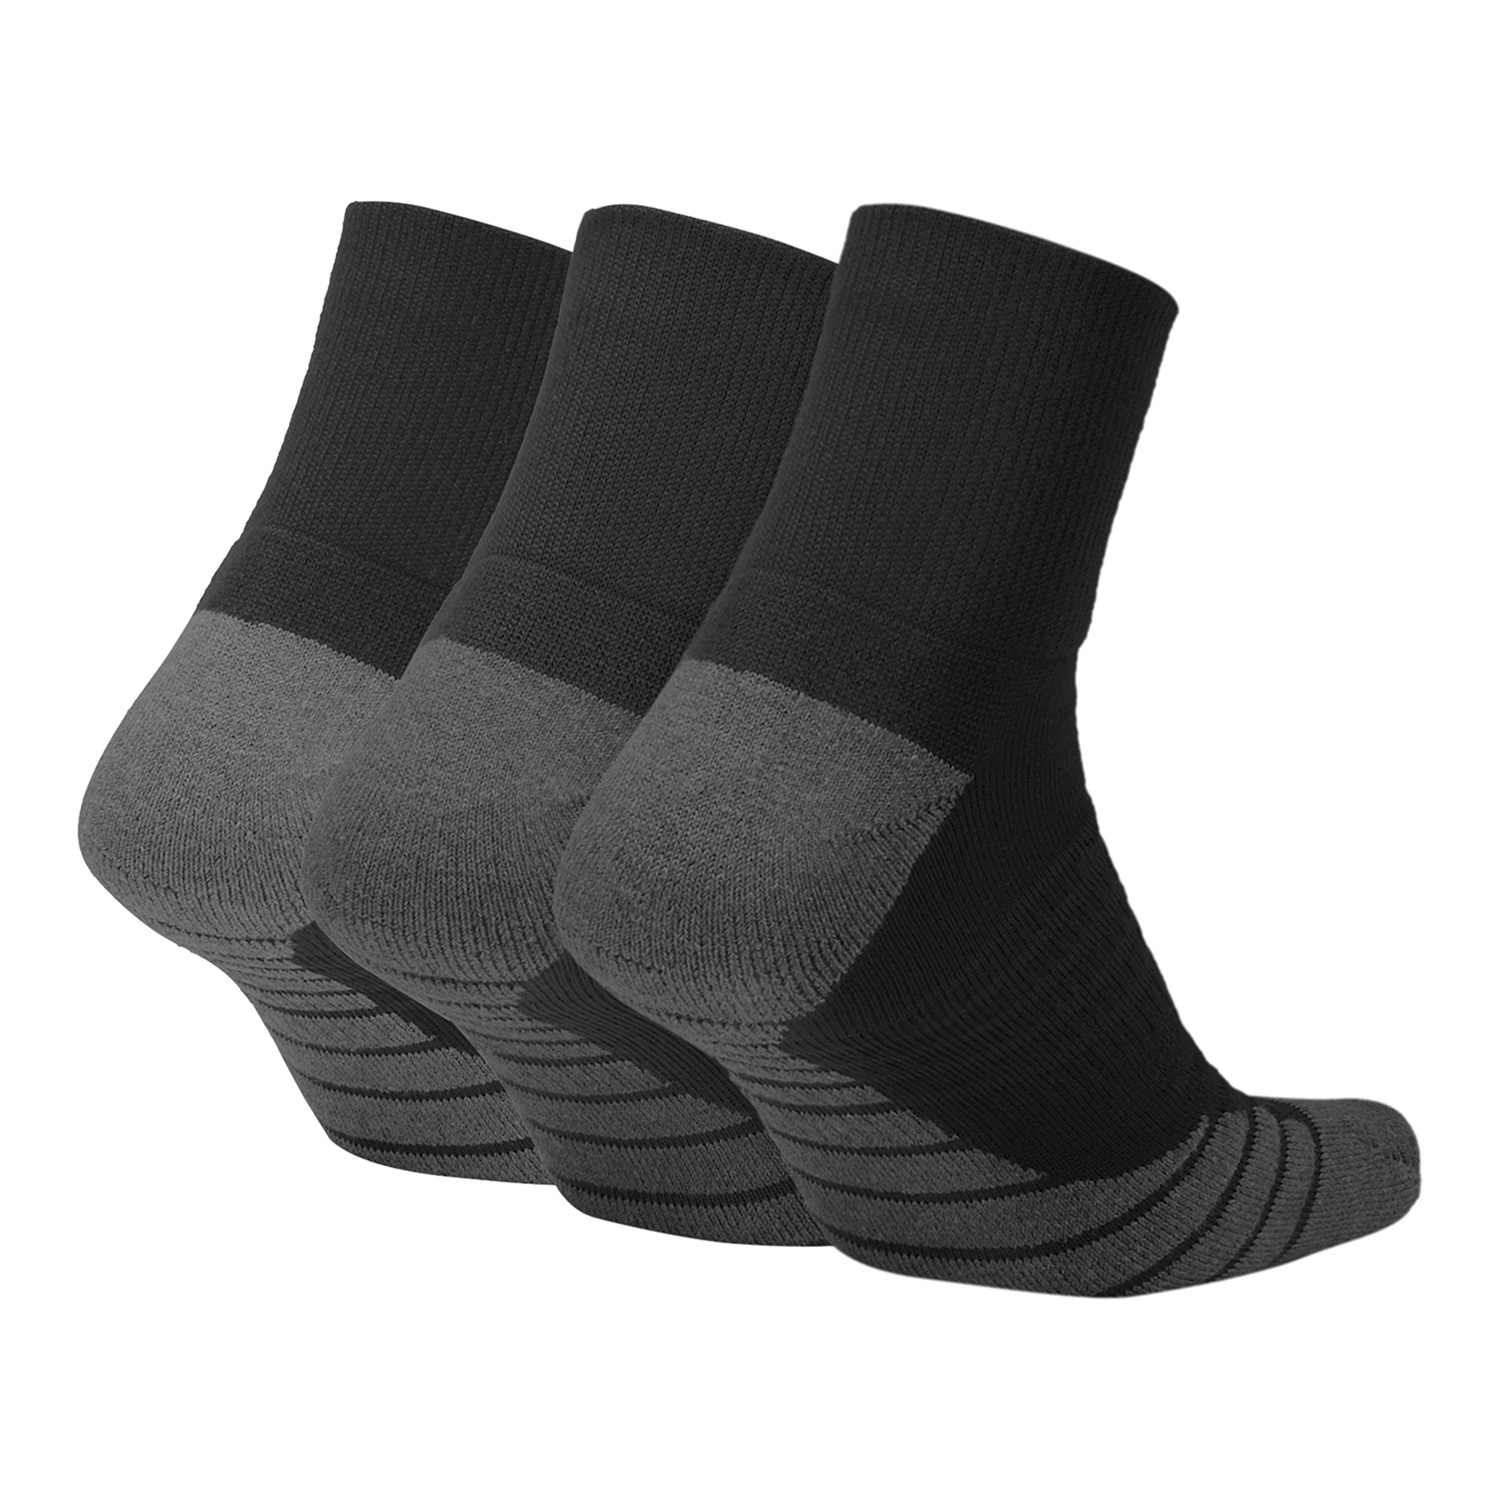 Nike Dry Cushion x 3 Calcetines - Black/Anthracite/White